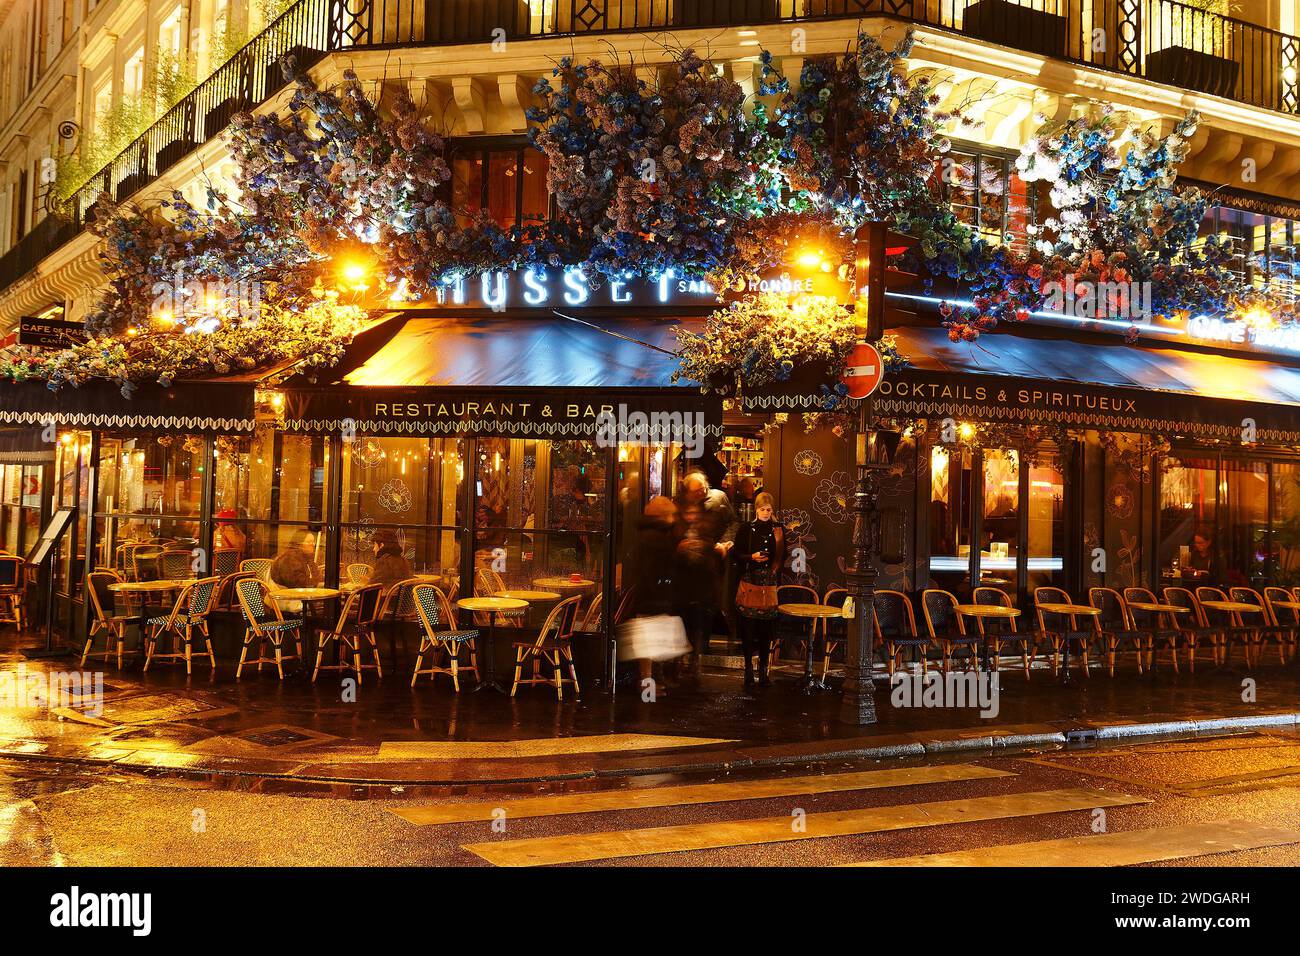 Exterior of Le Musset traditional French restaurant decorated with beautiful blue hydrangea flowers at rainy night. Paris. France. Stock Photo